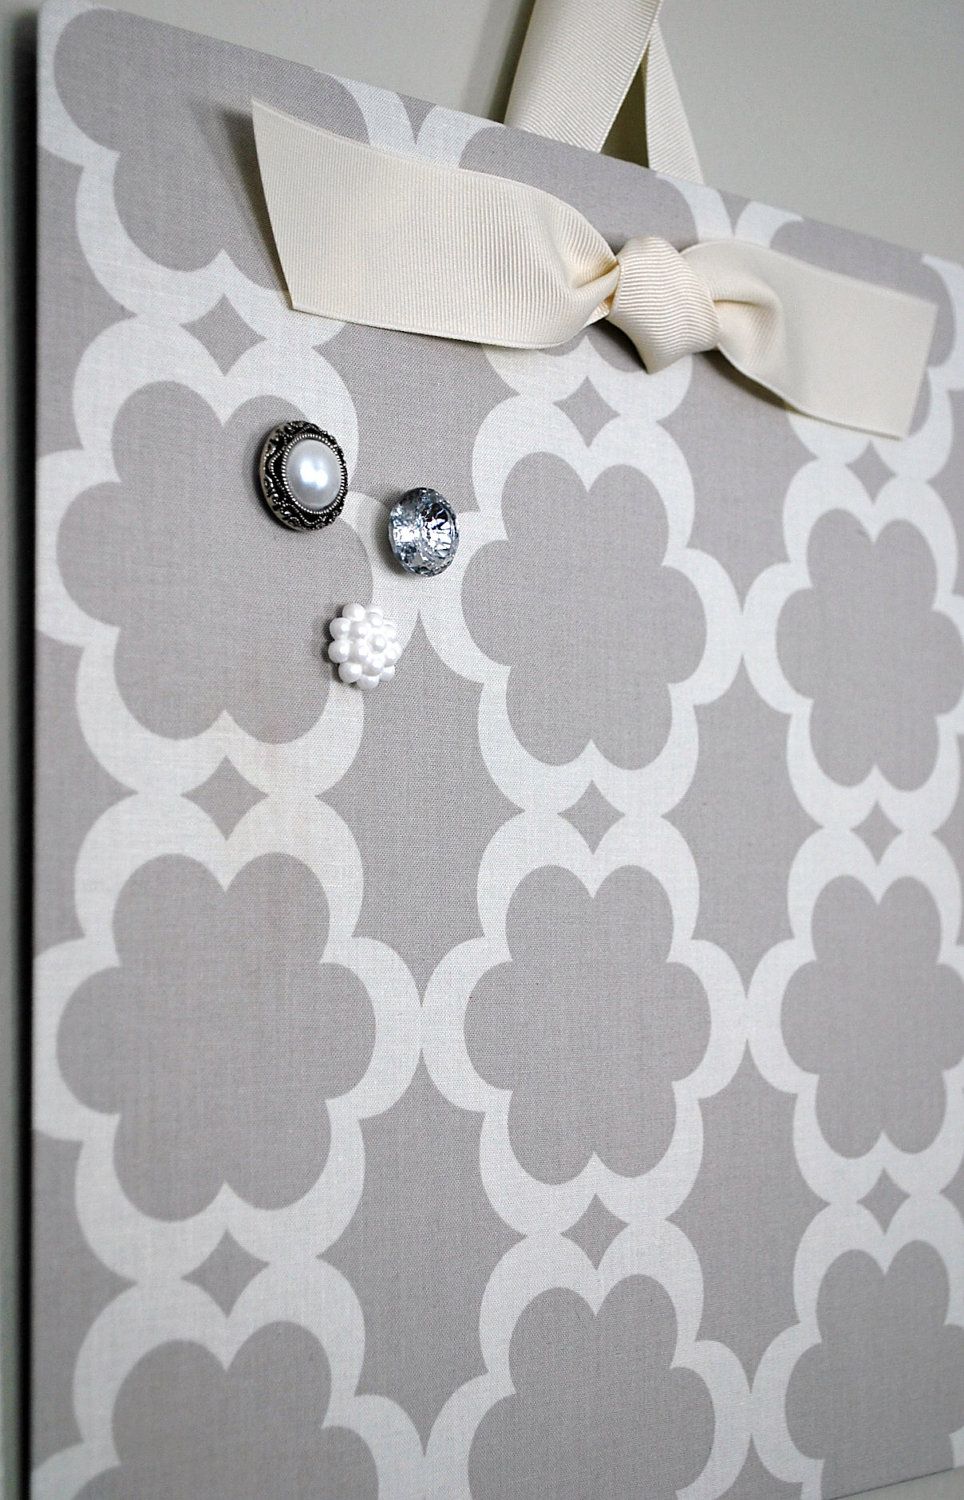 Flat cookie sheet covered in fabric becomes a cute magnet board